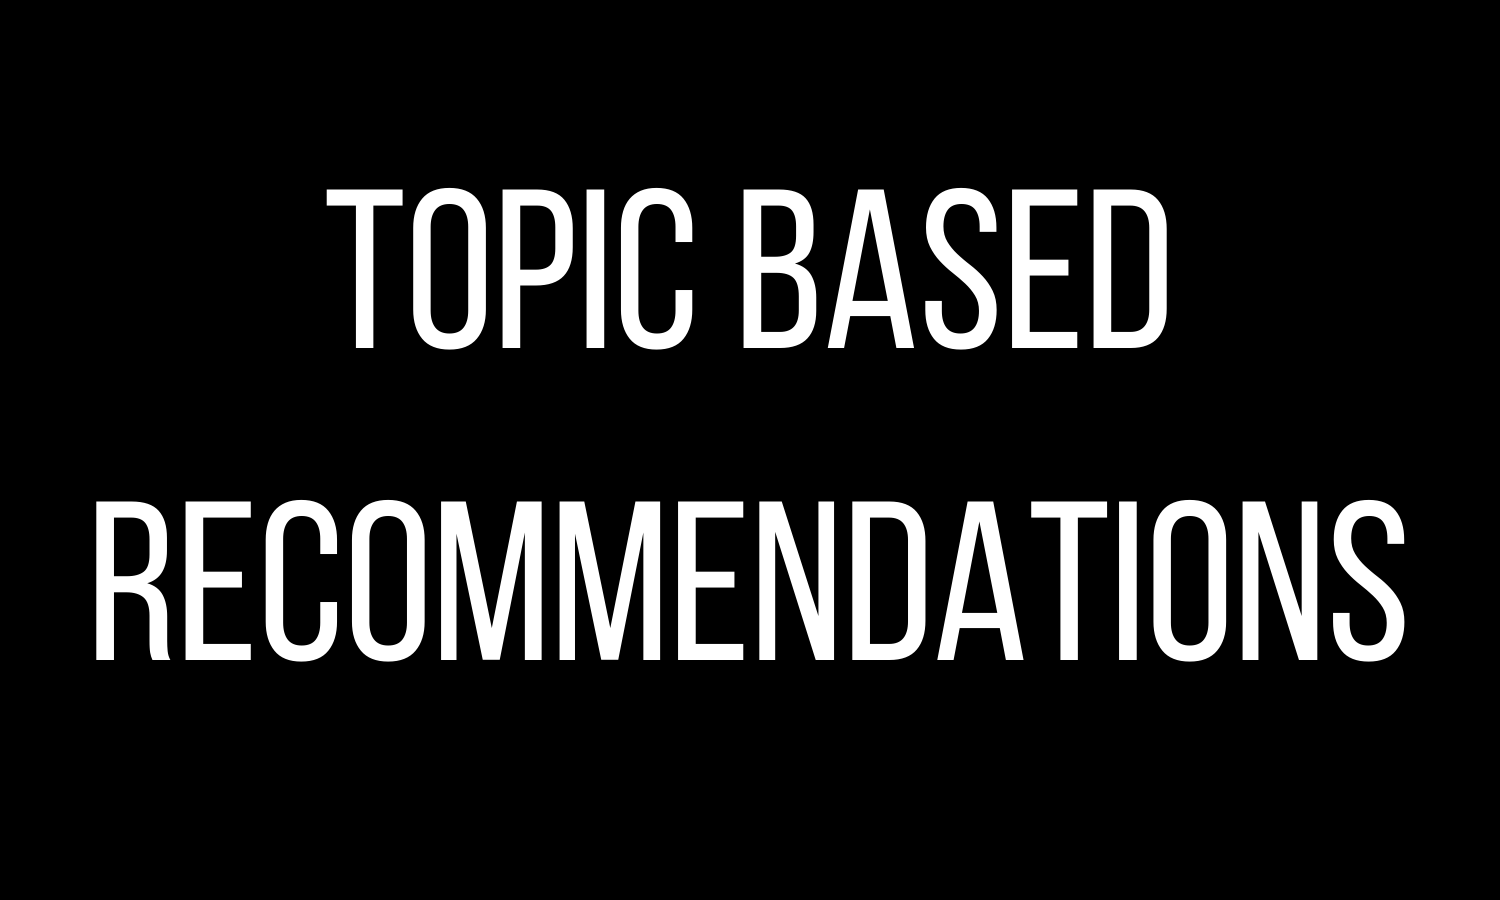 Topic Based Recommendations